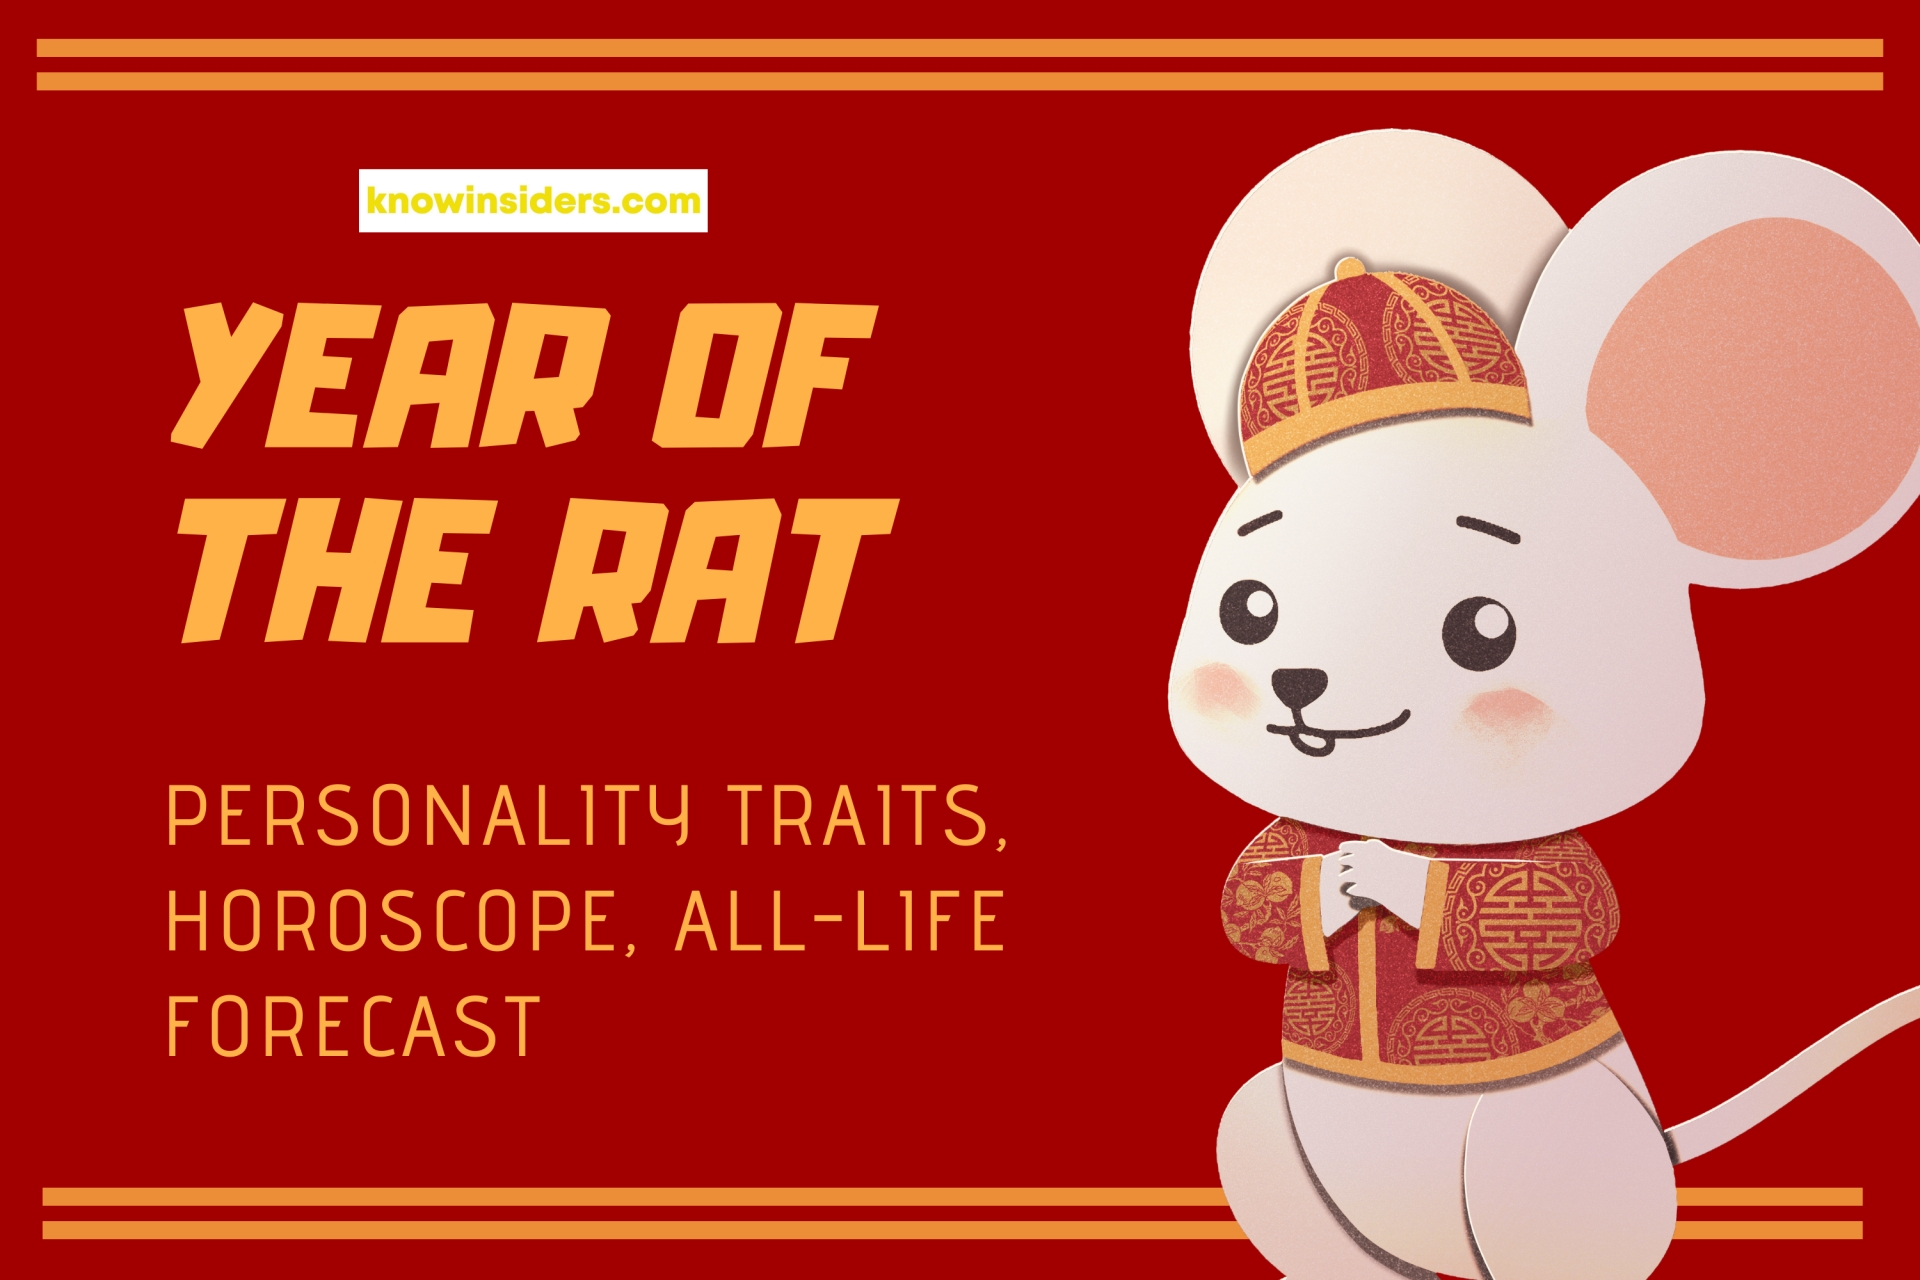 Year of the Rat: Personality Traits, Horoscope, All-Life Forecast - Chinese Zodiac